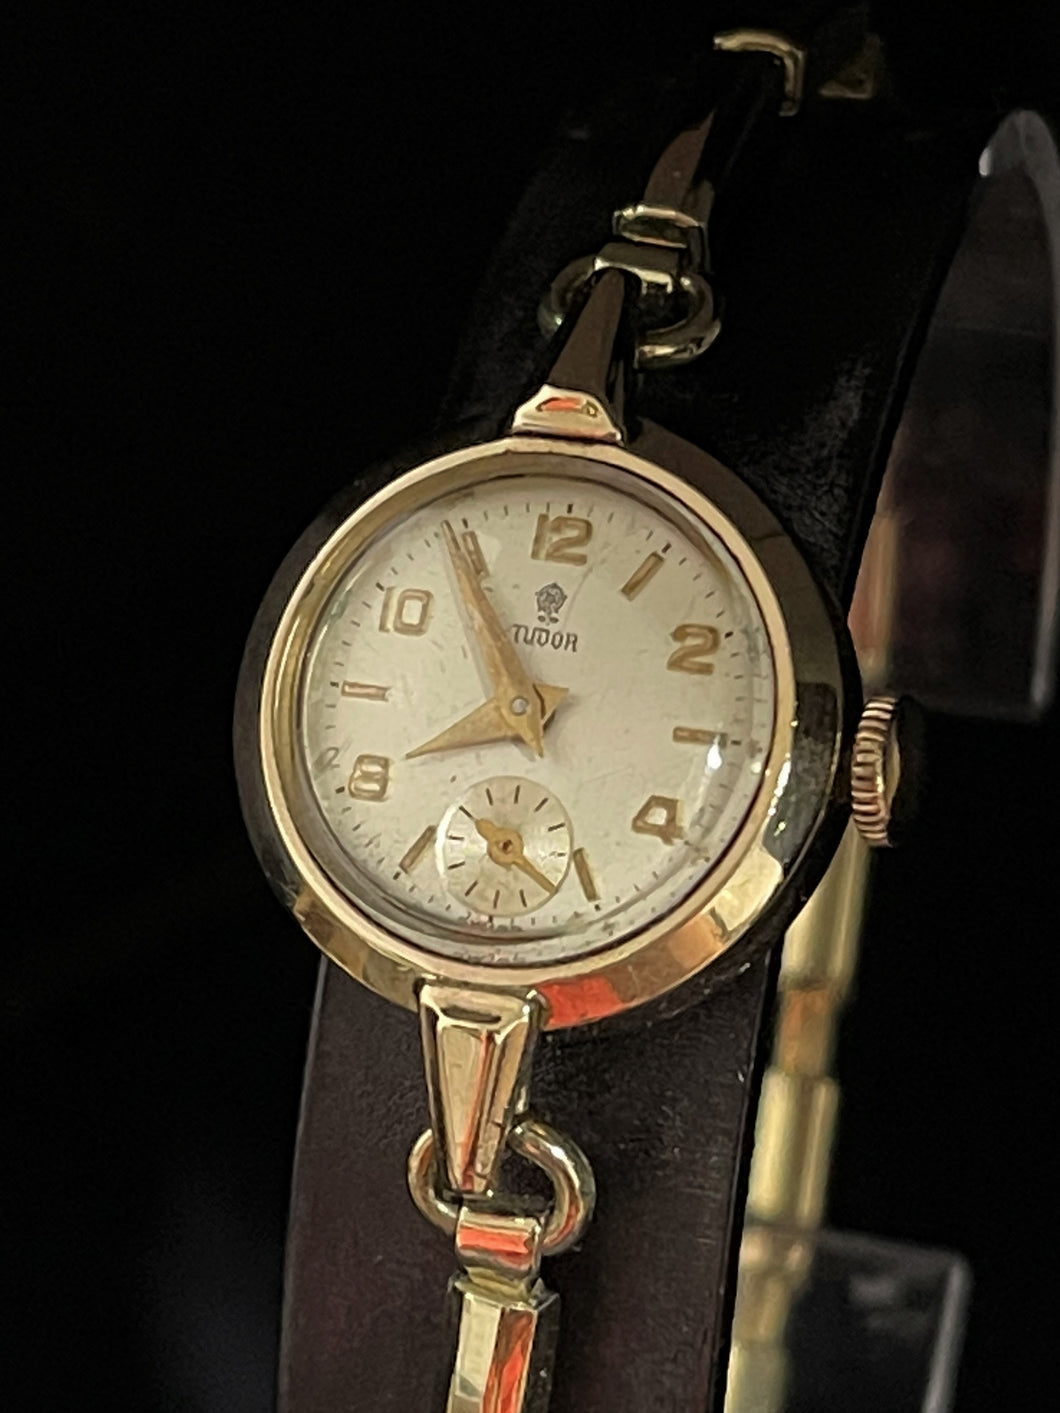 Preowned Vintage Ladies 9ct Yellow Gold Manual Wind Tudor Watch.